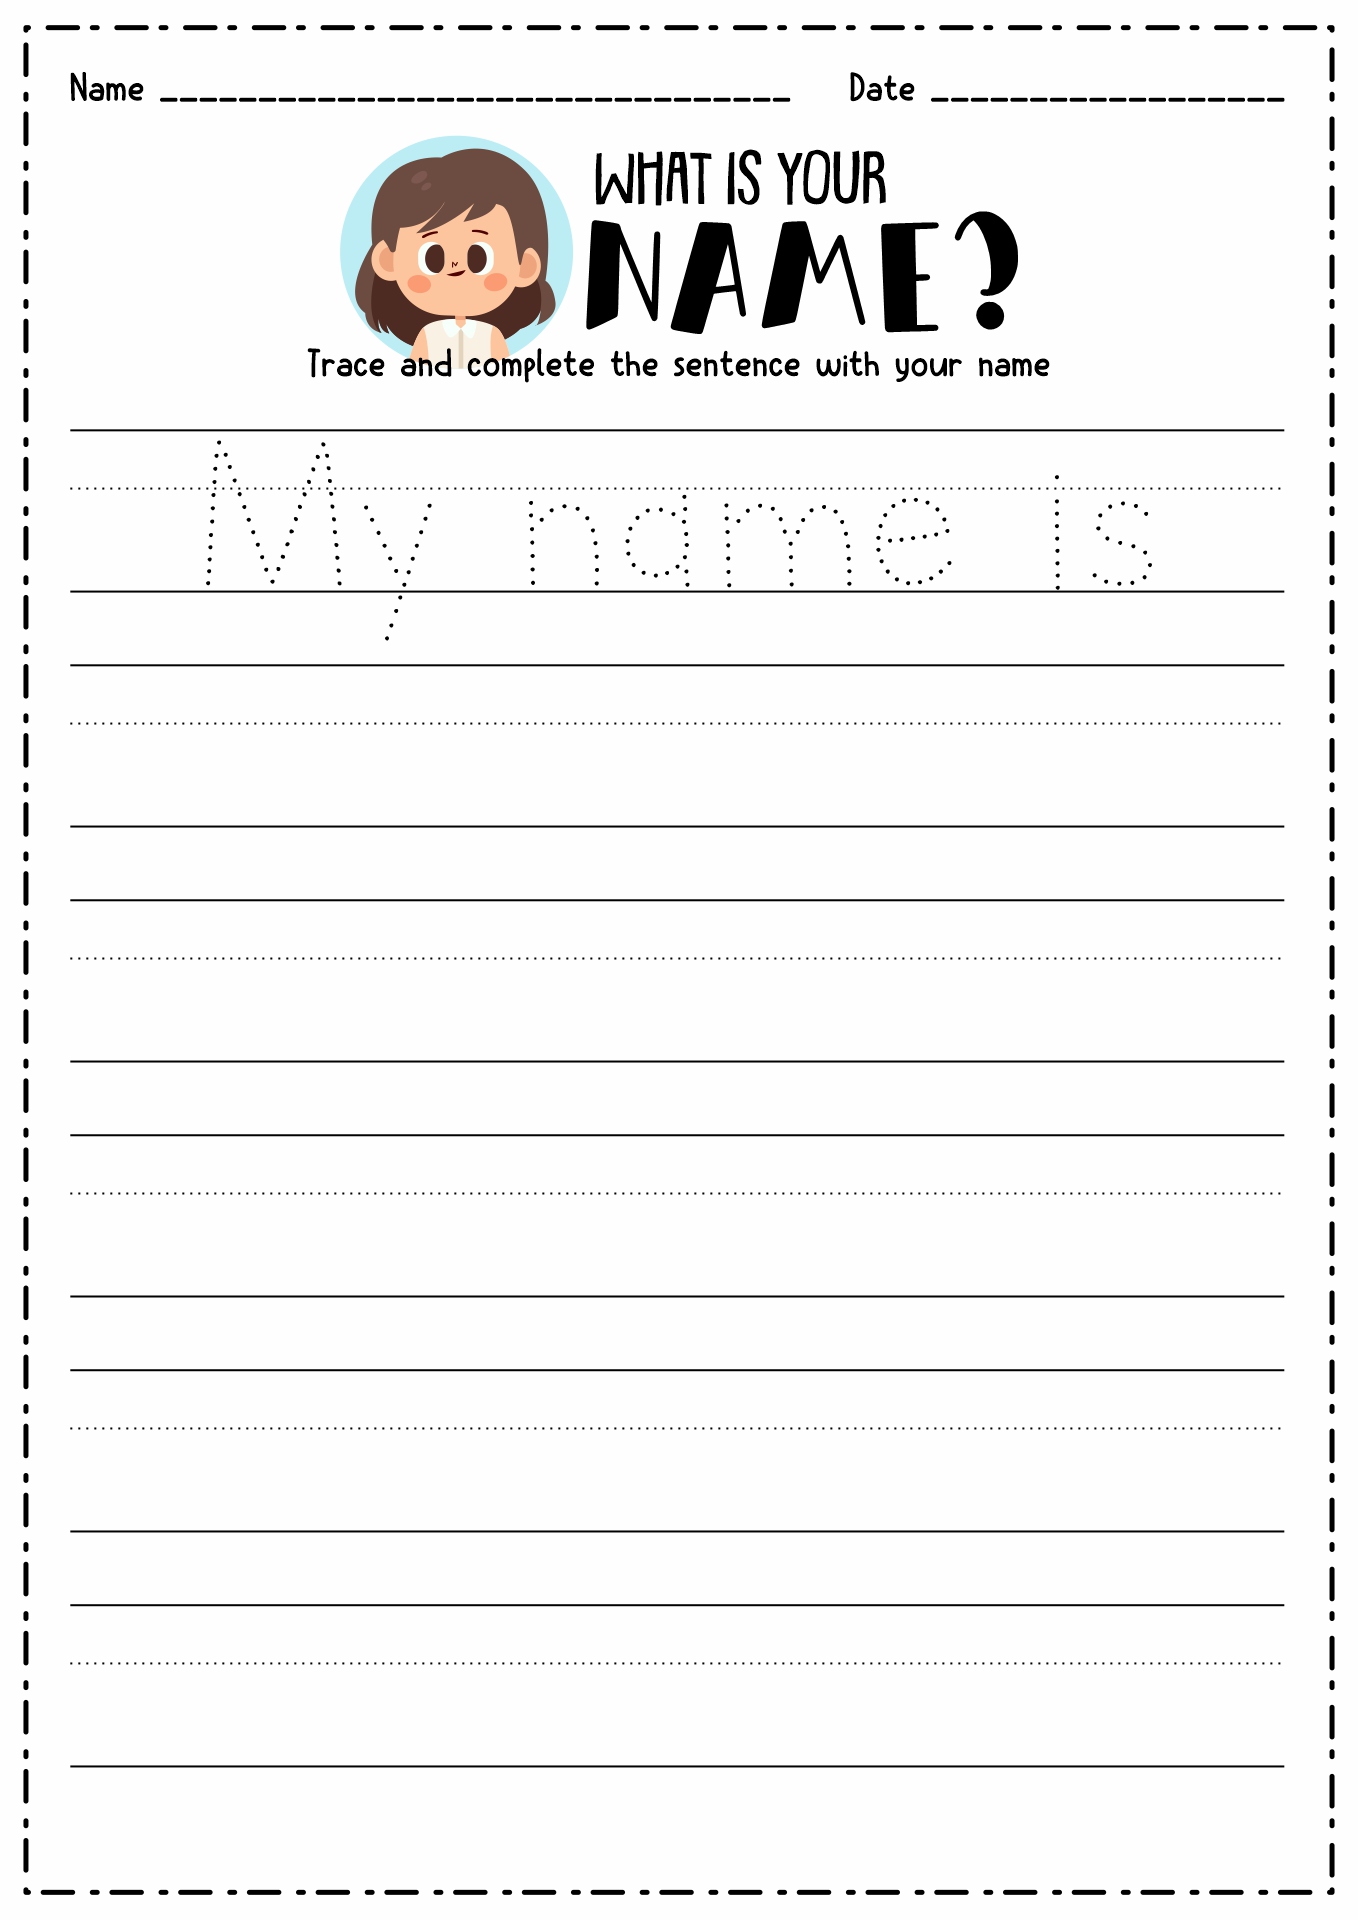 14 Best Images of Create Name Tracing Worksheets Create